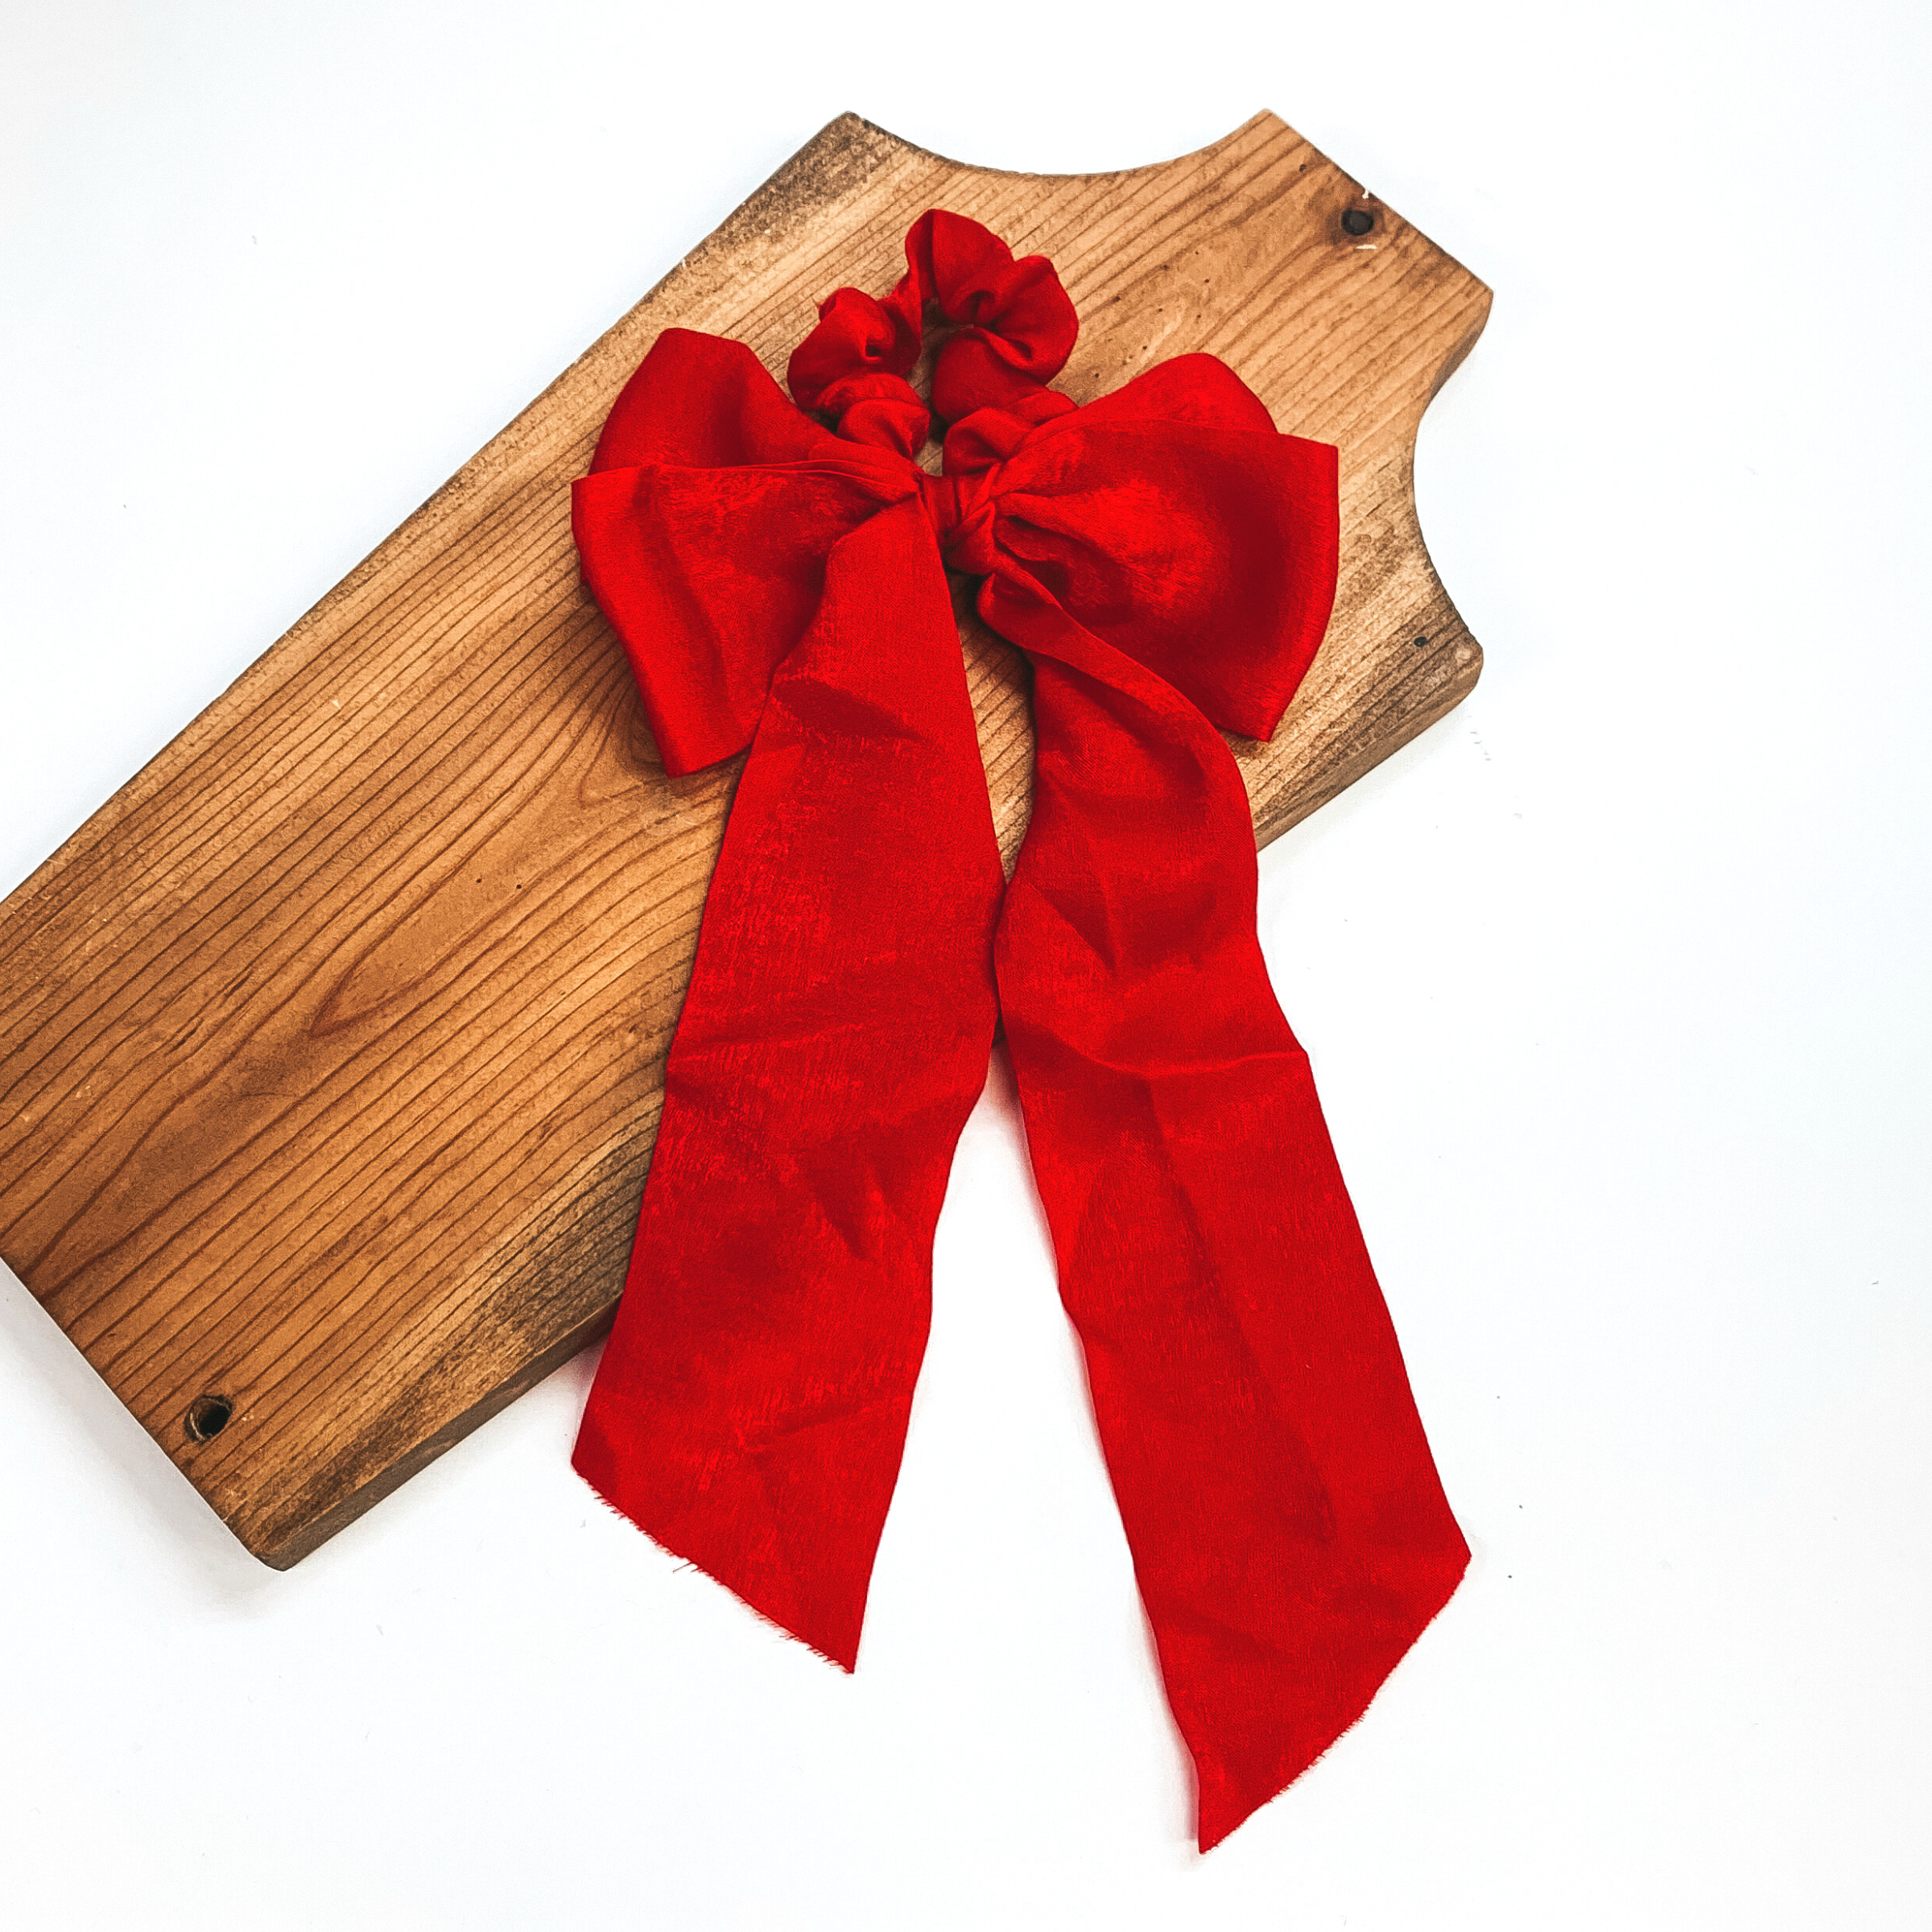 This is a red satin scrunchie with a long bow, this scrunchie is taken on  a brown necklace board and on a white background.